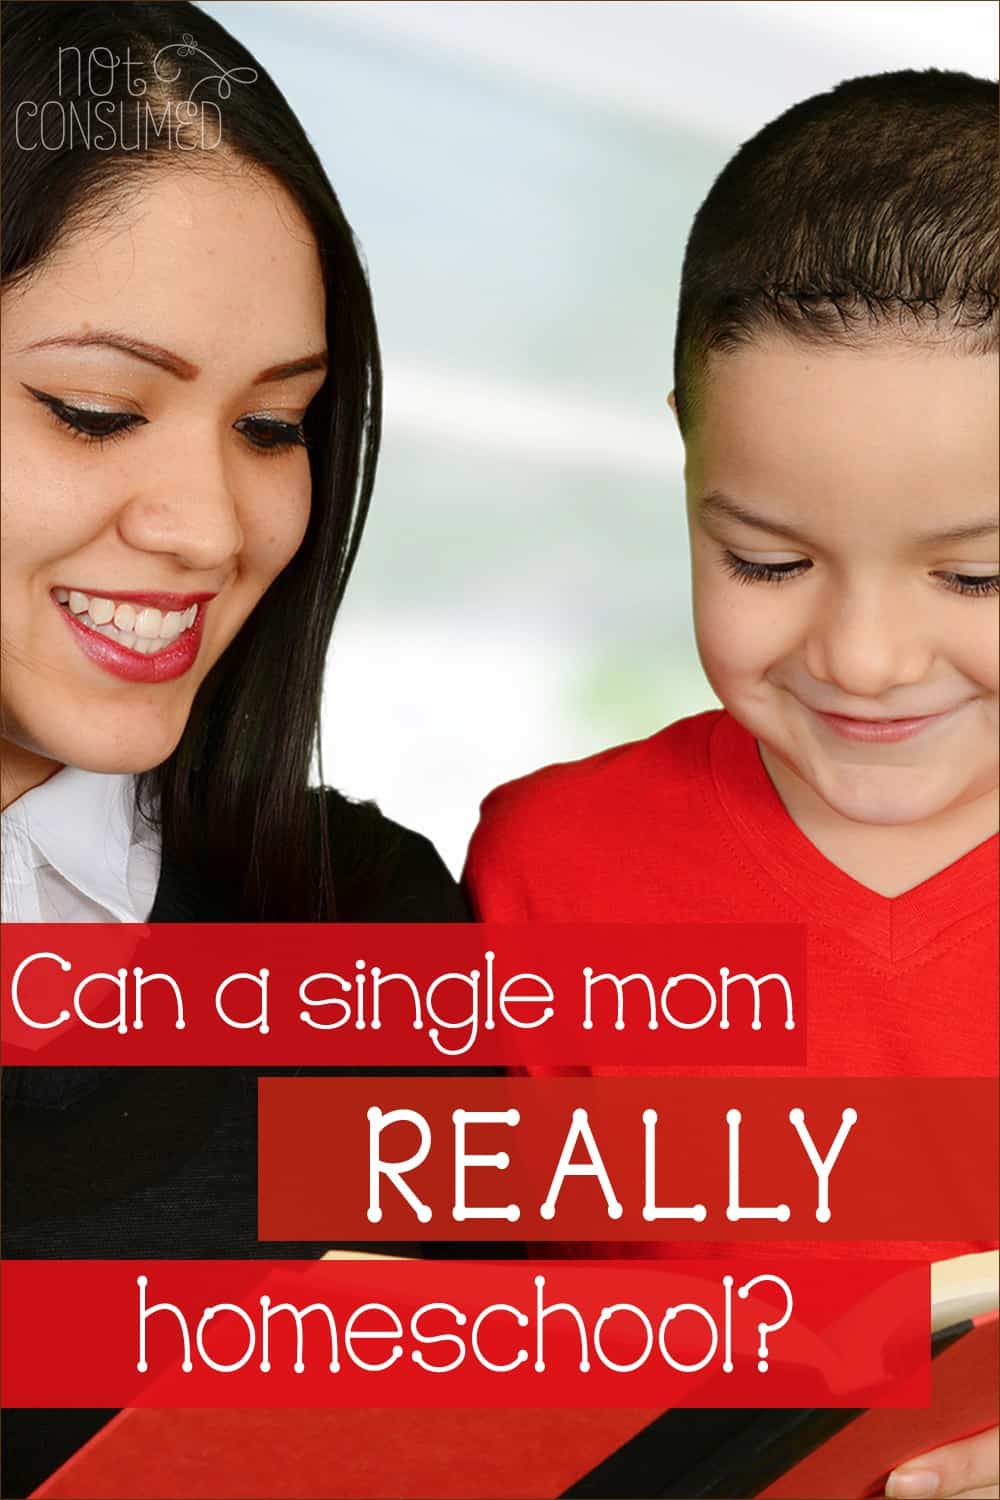 Do you know a single mom who wishes to homeschool? It's not an ...